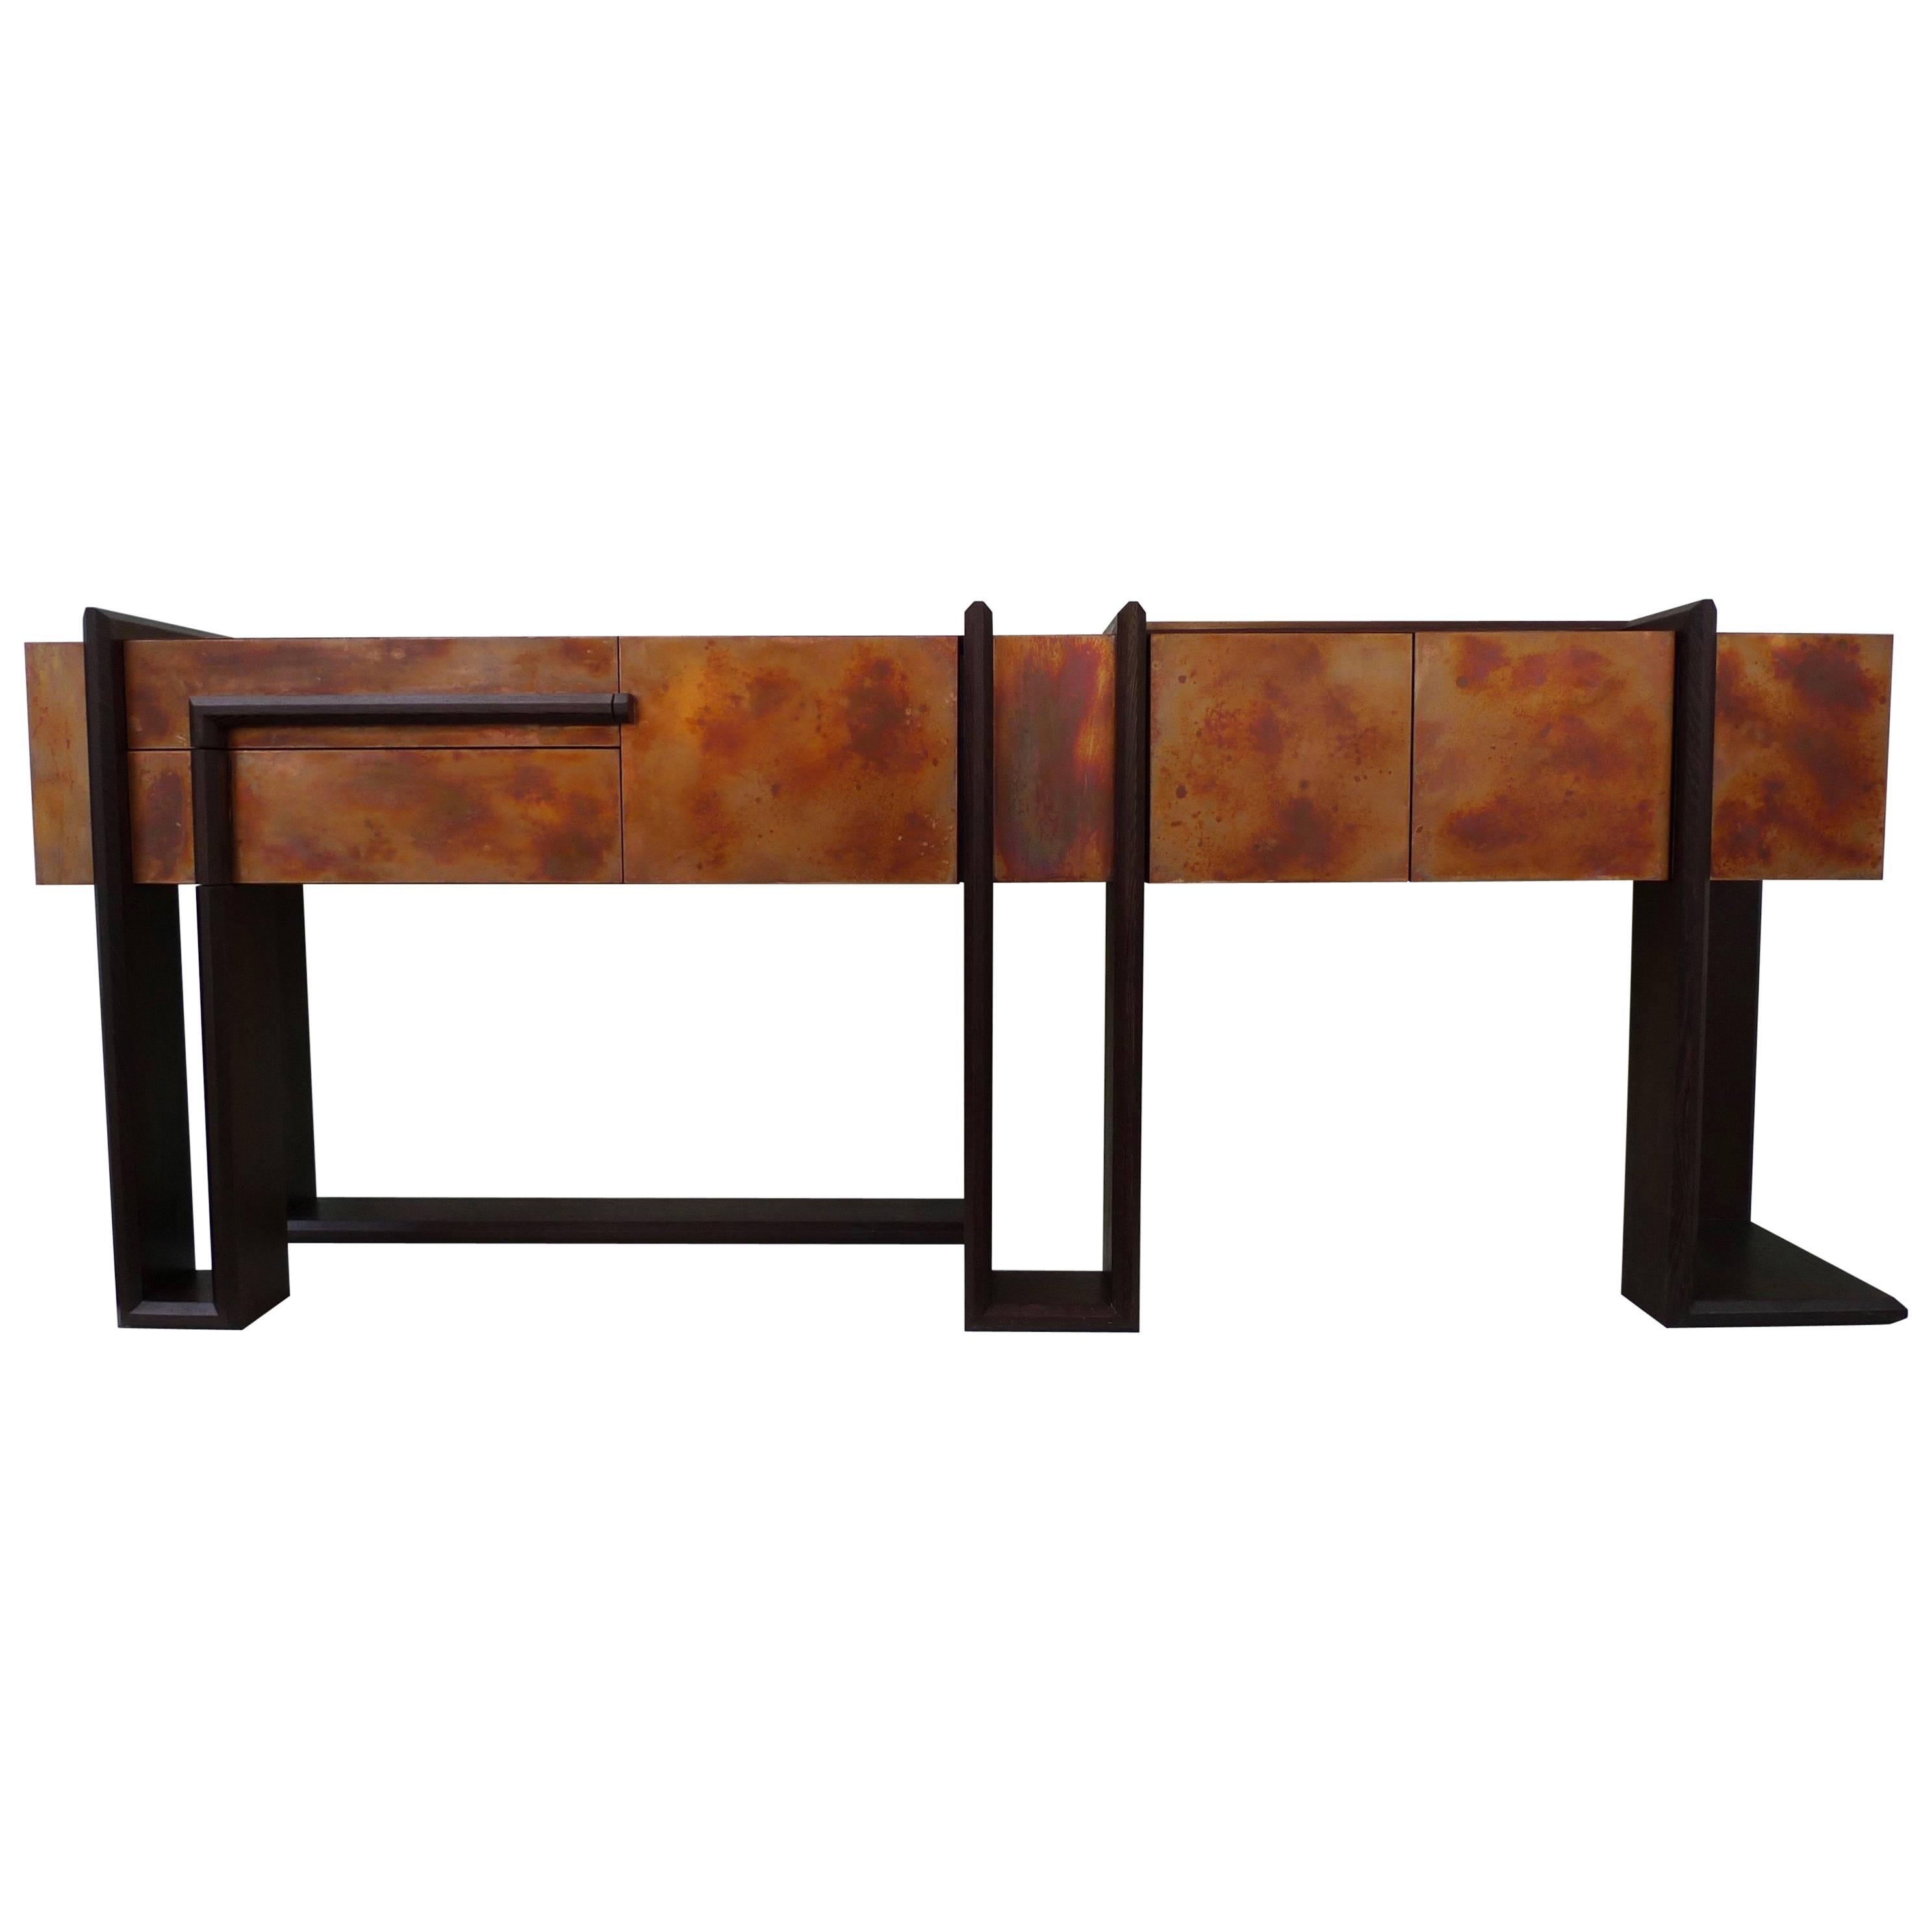 Contemporary Sequenza Bar Cabinet Credenza Sideboard in Wegne and Copper Patina For Sale